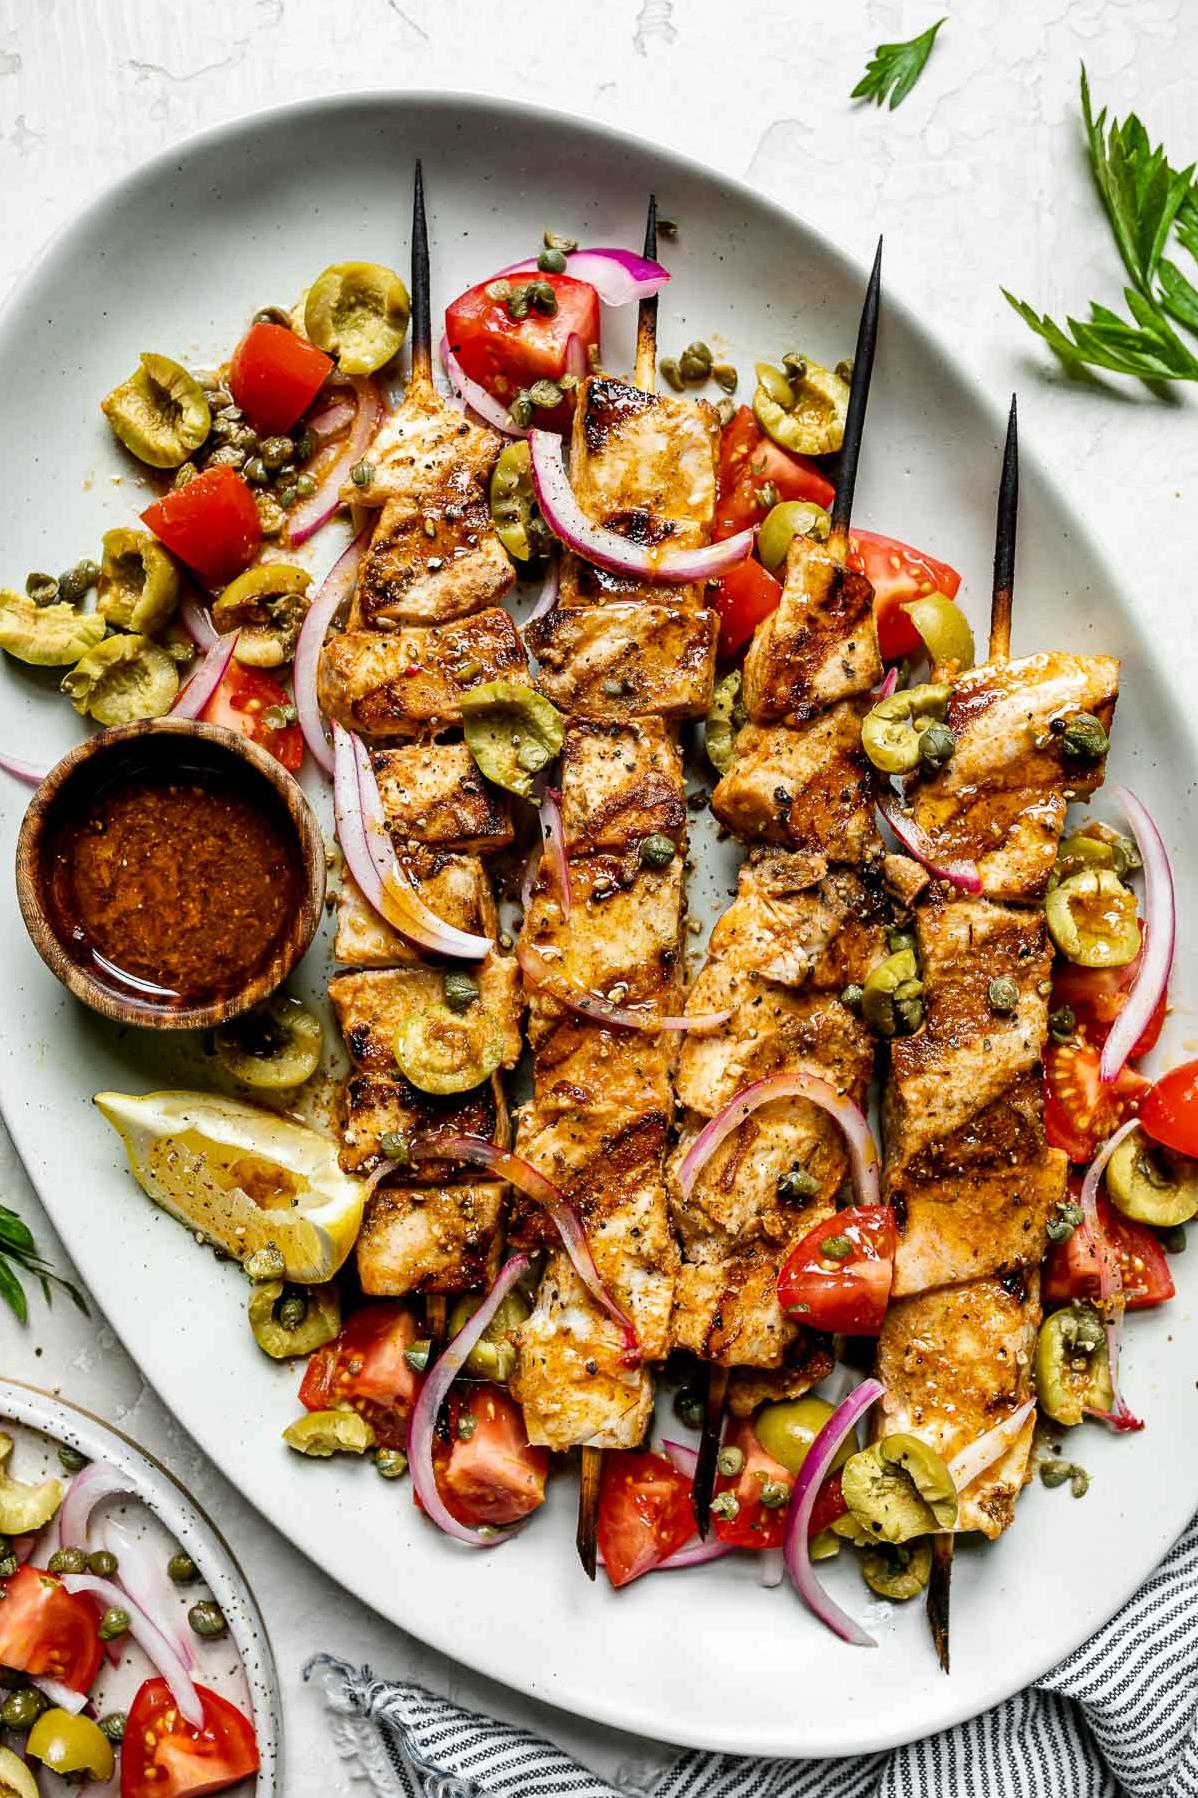  Grilled to perfection, these swordfish kebabs are packed with flavor that will make your taste buds dance.